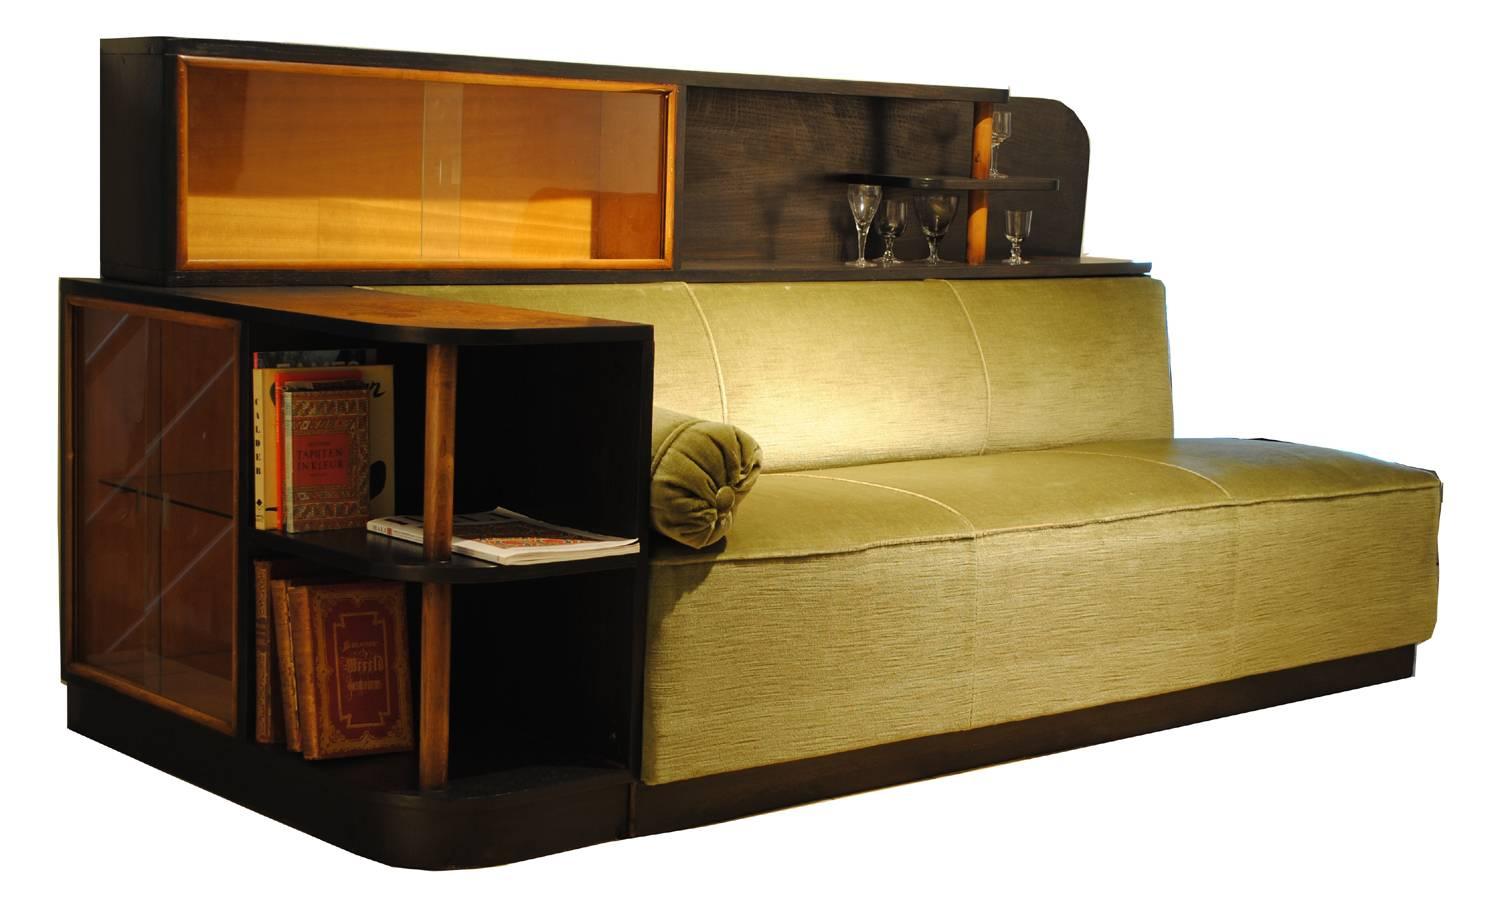 Great Gatsby style sofa.
Very nice and rare Art Deco sofa with integrated cabinets and shelving that can be used as bookcase and bar.
It has a nice green velvet upholstery.

Size in cm:
All W x D x H 222 x 93 x 105 cm 
Sofa W x D x H 180 x 57